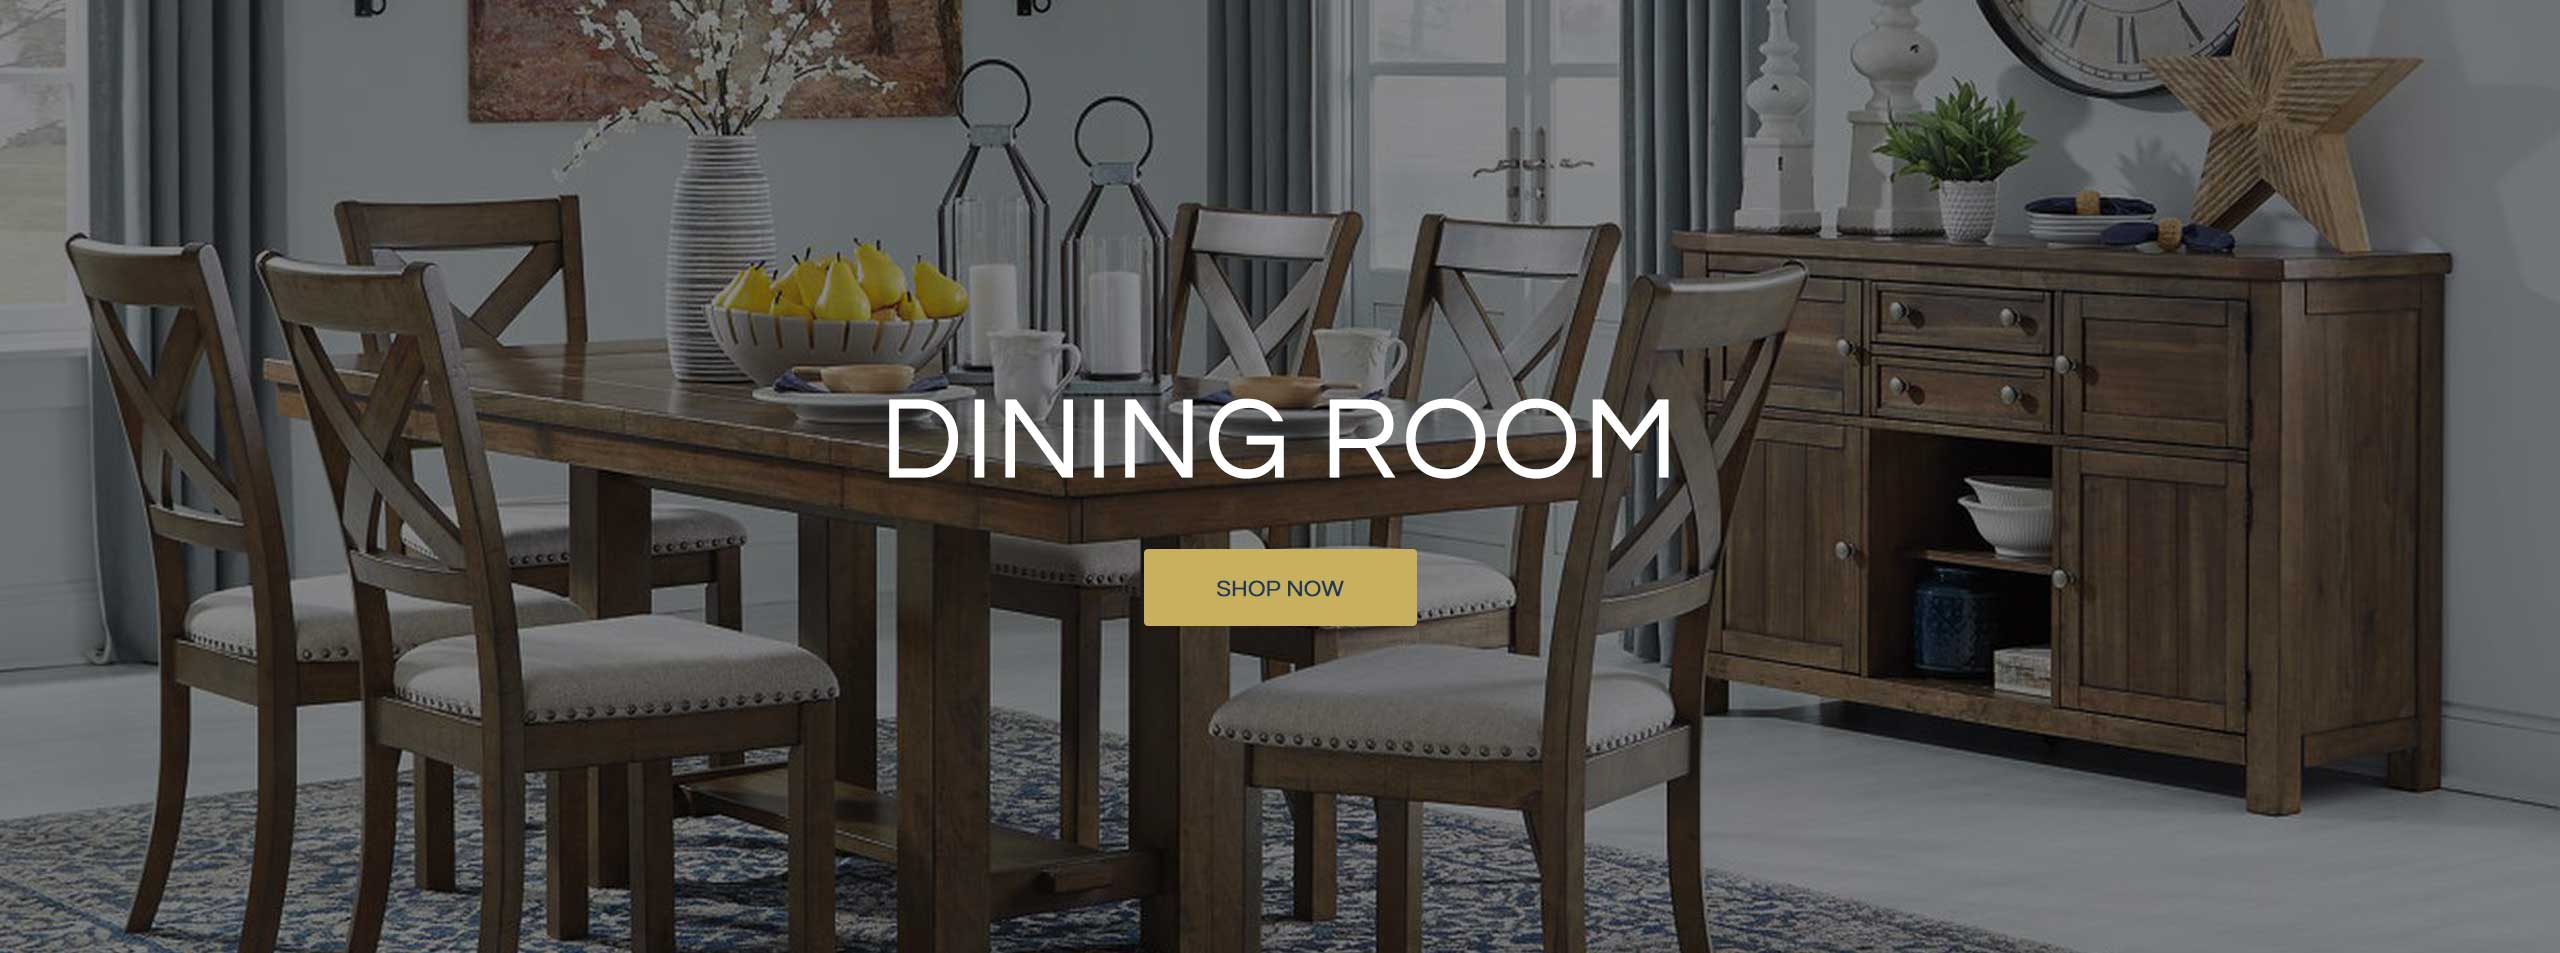 Dining Room - Shop Now